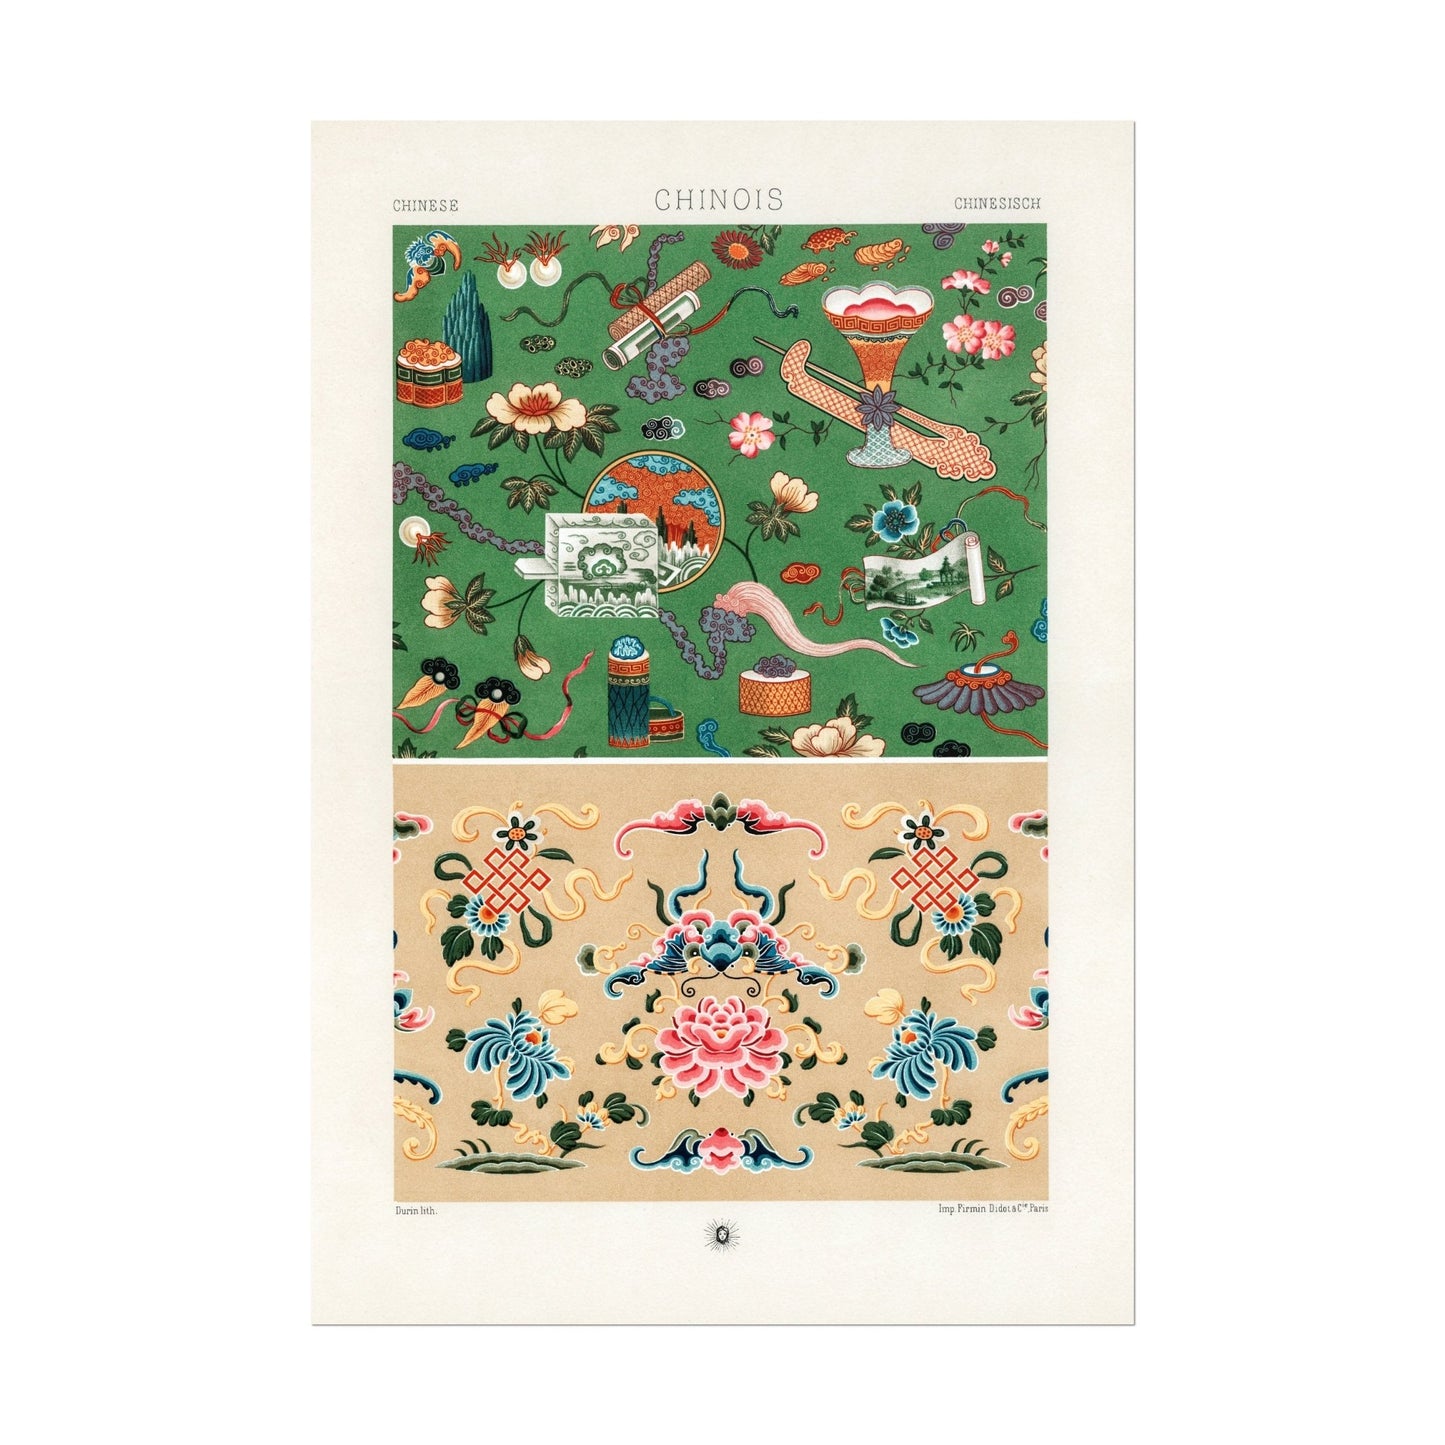 ALBERT RACINET - Chinese Pattern Lithograph from 'L'ornement Polychrome' - Pathos Studio - Posters, Prints, & Visual Artwork